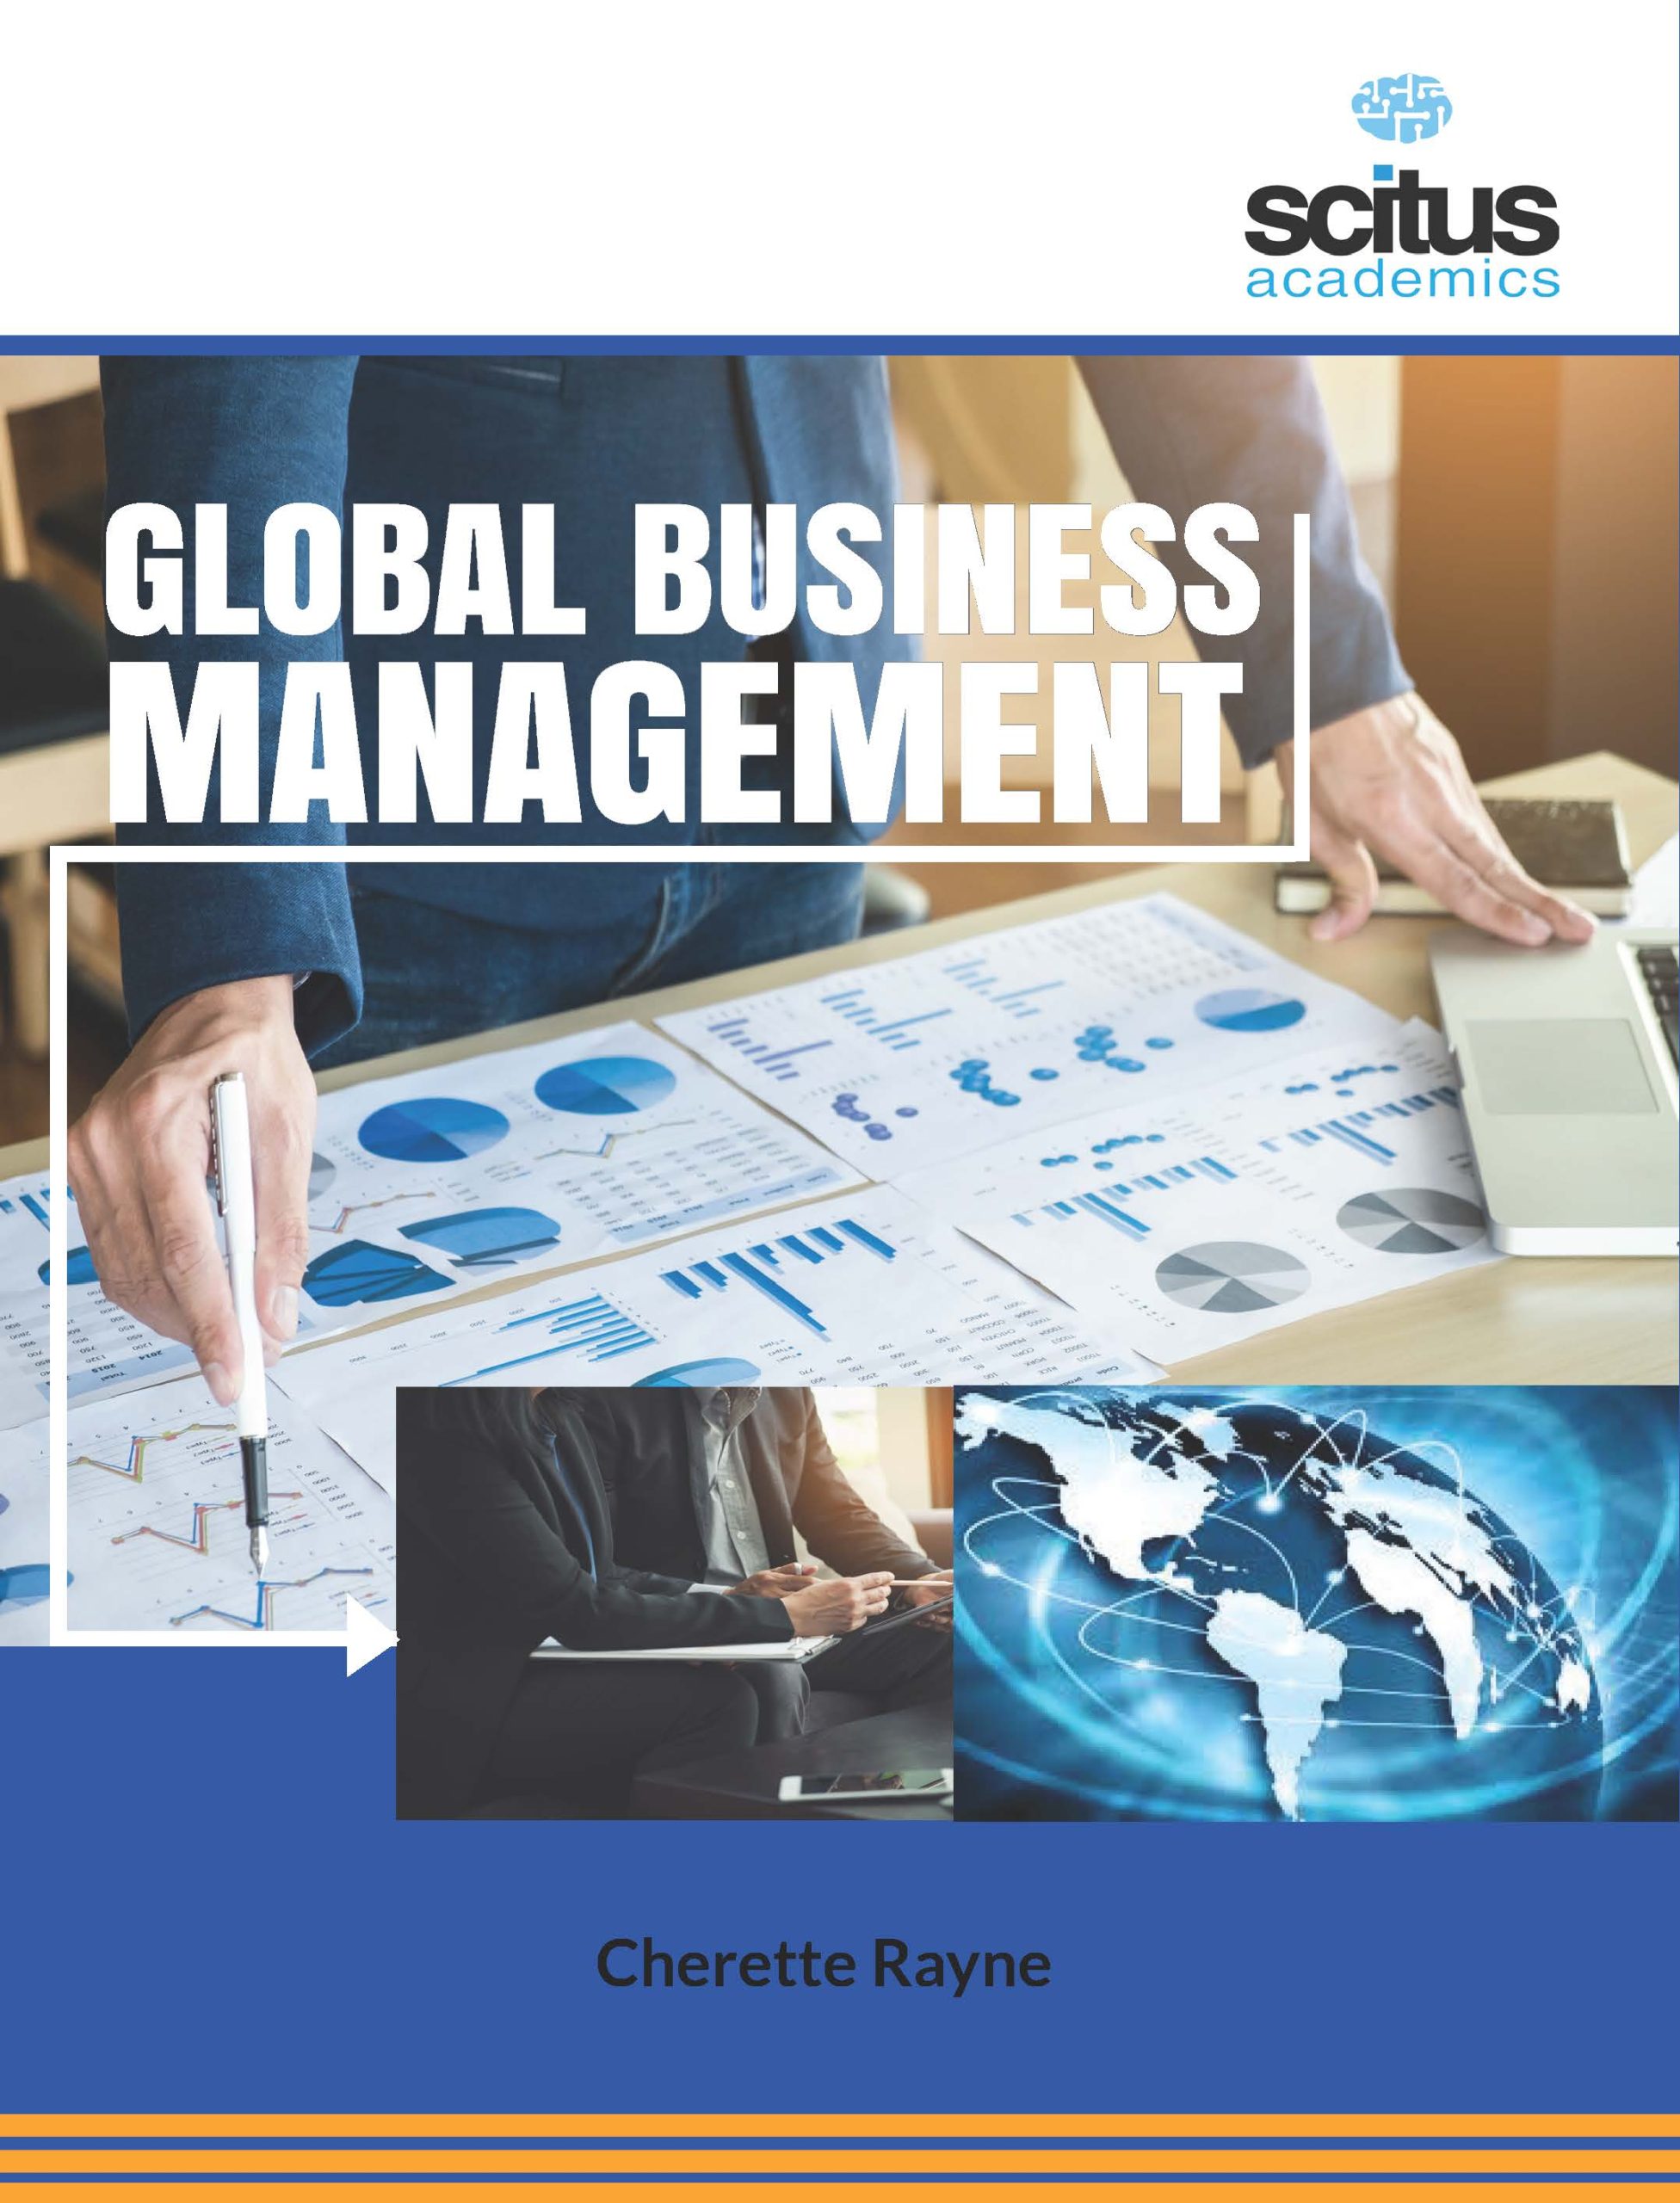 phd in global business management